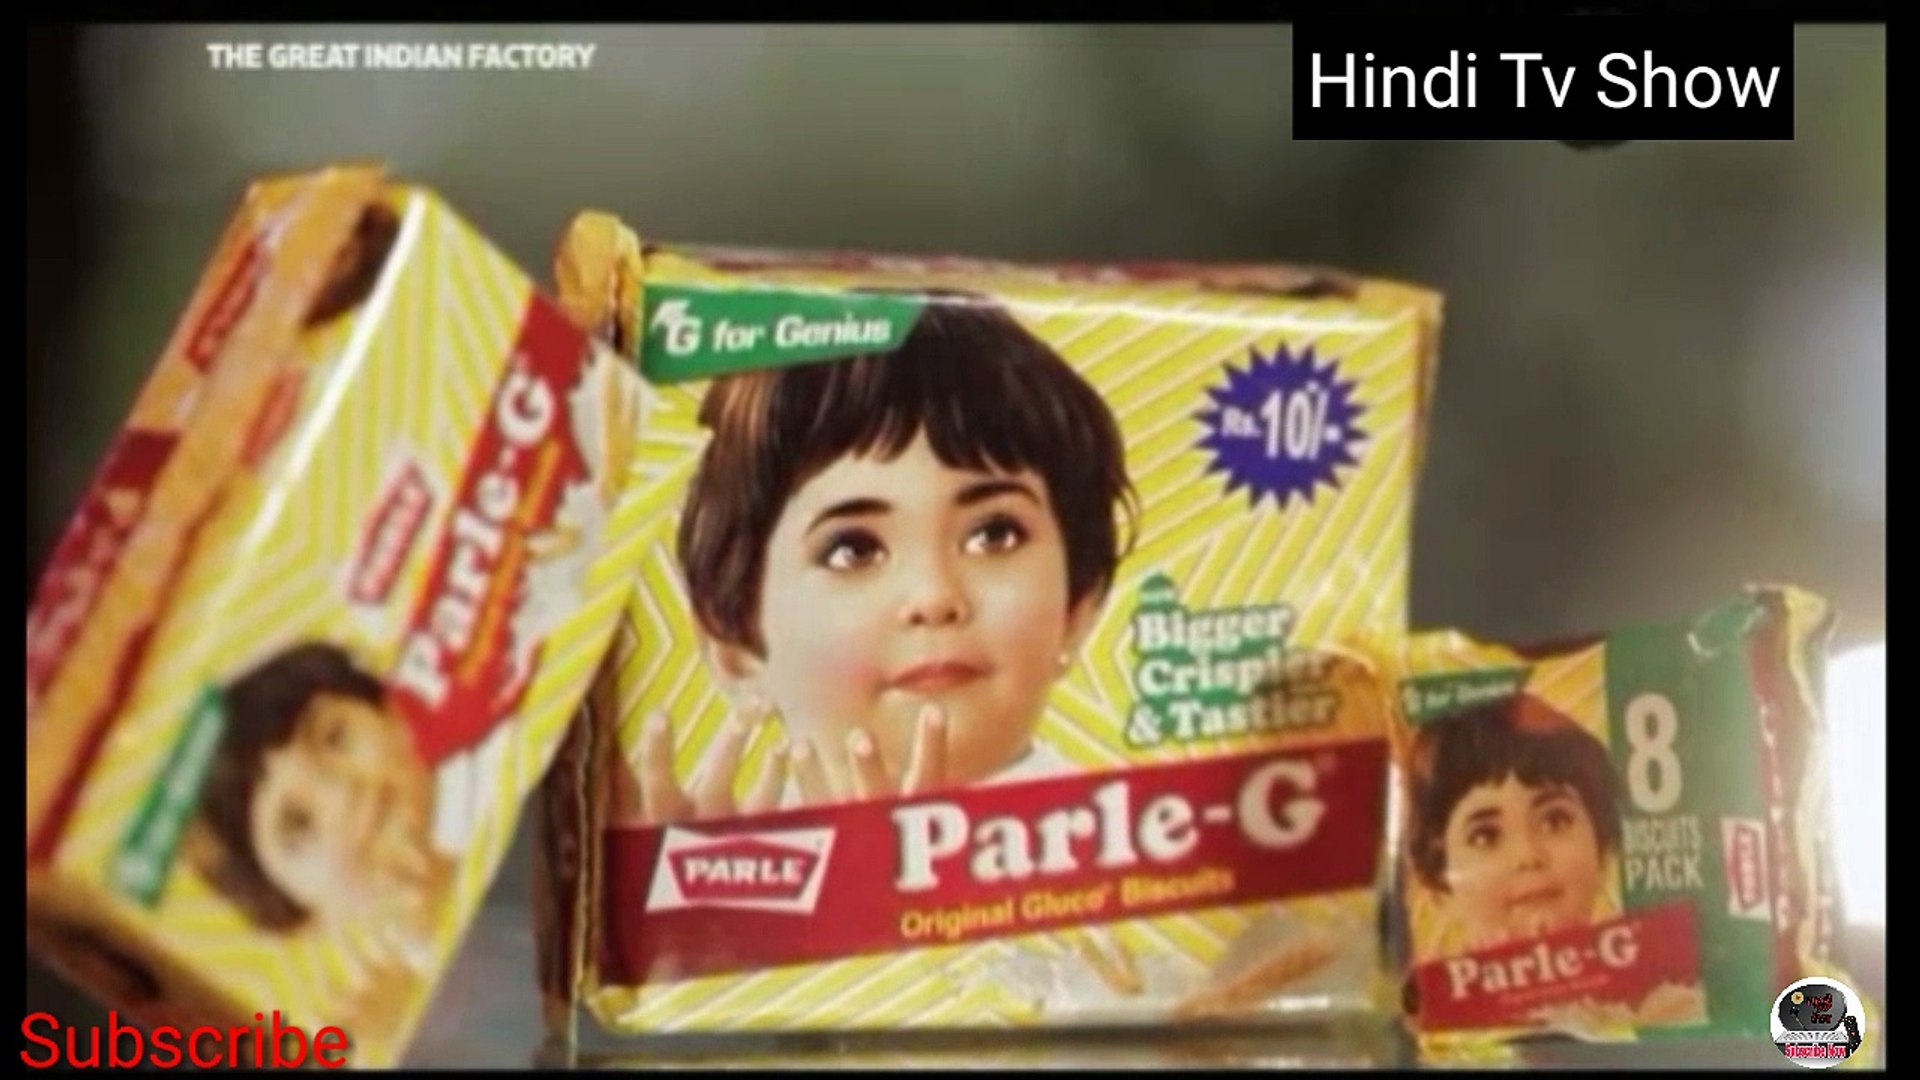 How to make Parle-G Biscuit Hindi|Parle-G Biscuit Kaise banate he